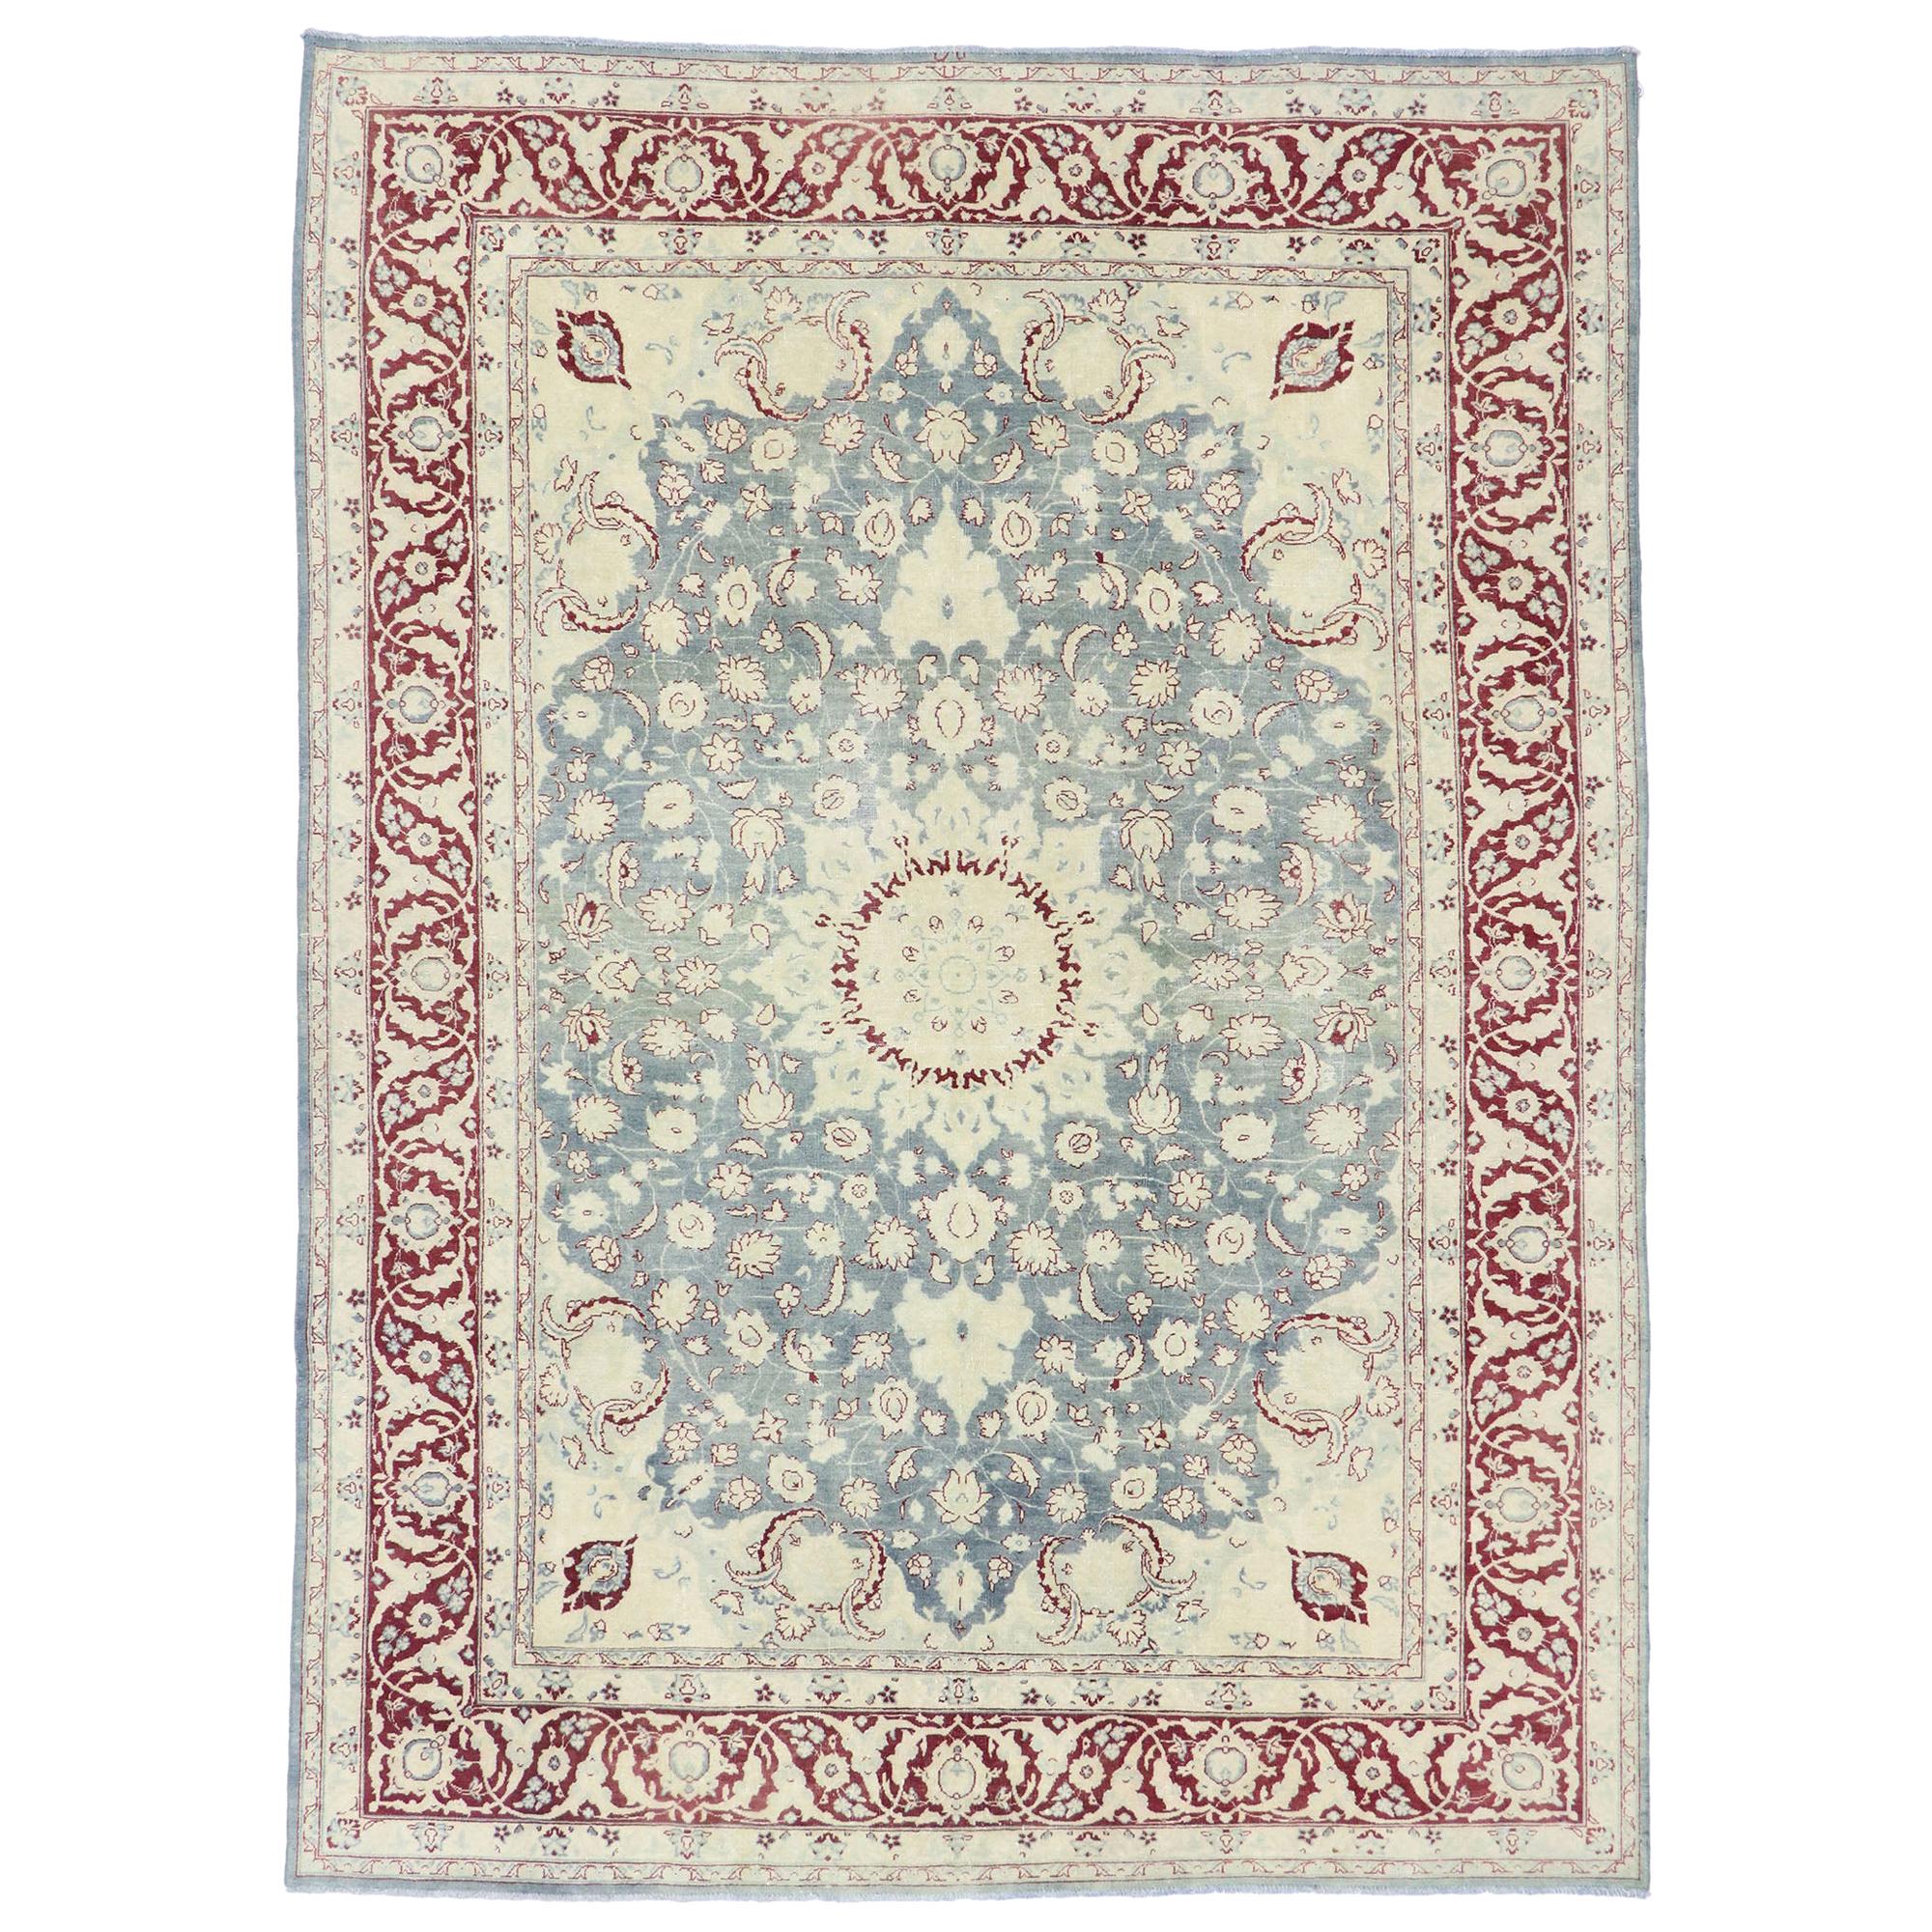 Distressed Antique Persian Tabriz Rug with Modern Rustic English Style